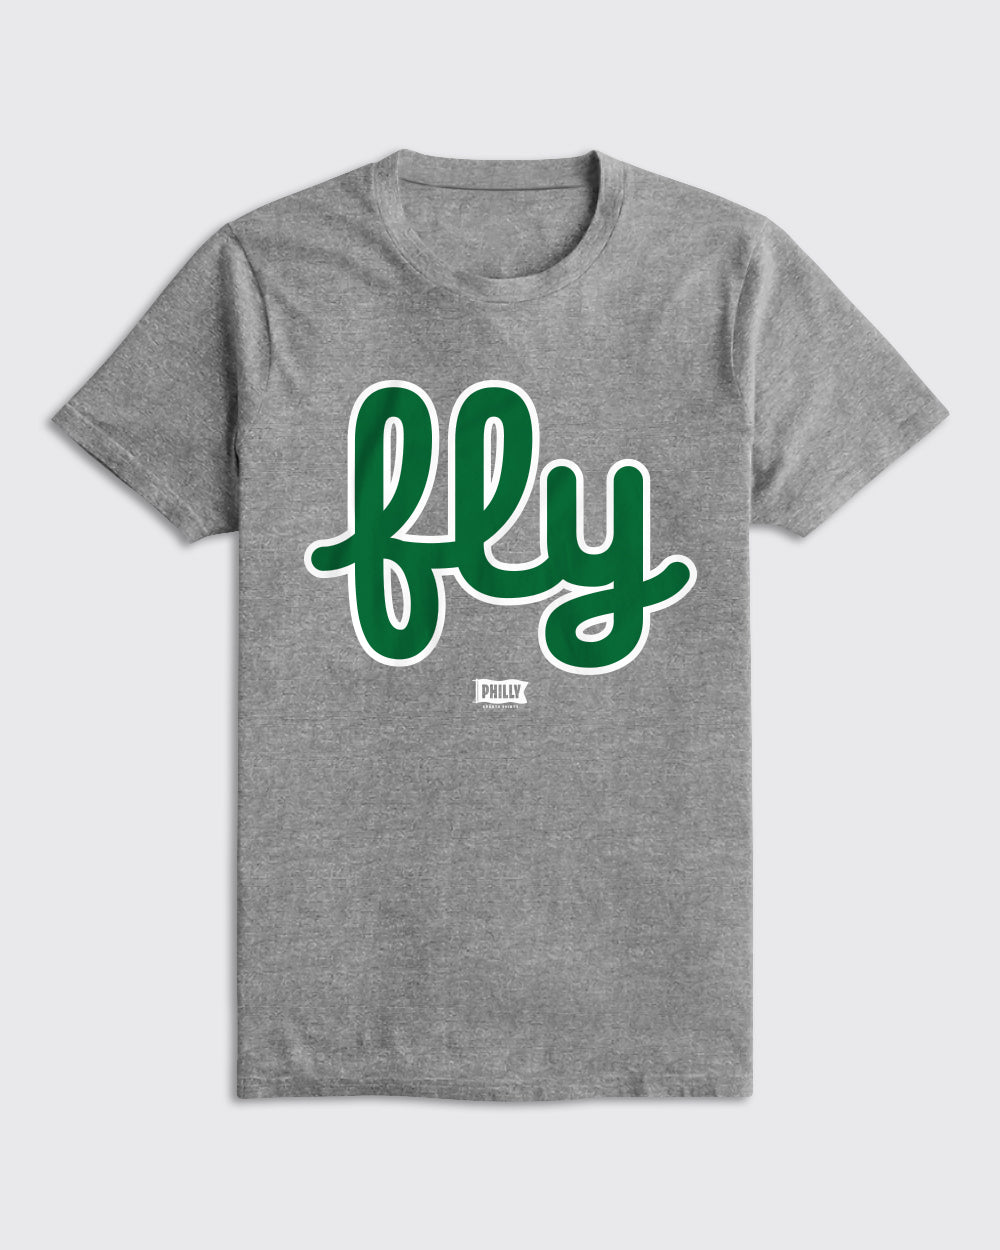 Eagles Fly Shirt - Eagles, T-Shirts - Philly Sports Shirts